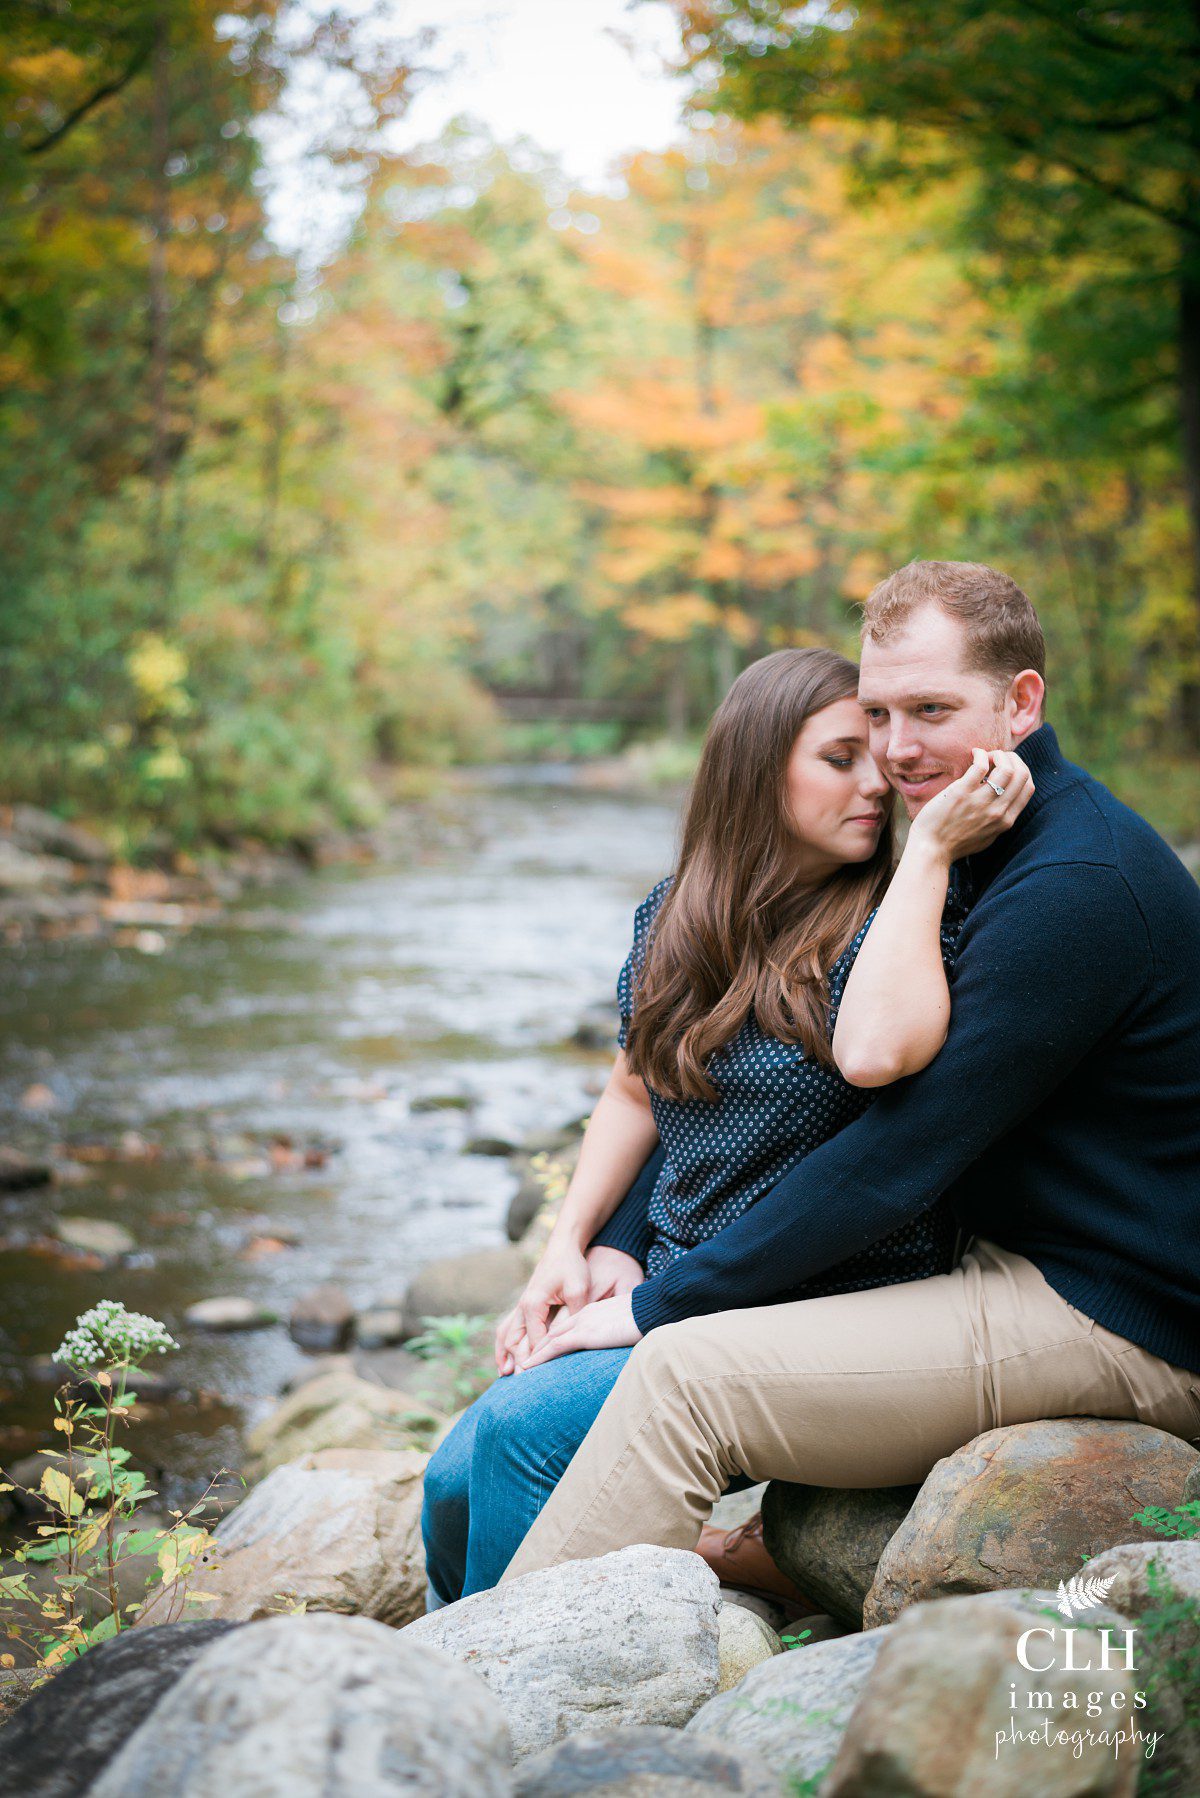 clh-images-photography-saratoga-engagement-photography-capital-district-engagement-photography-saratoga-state-park-photography-amy-and-matt-engagement-photos-20